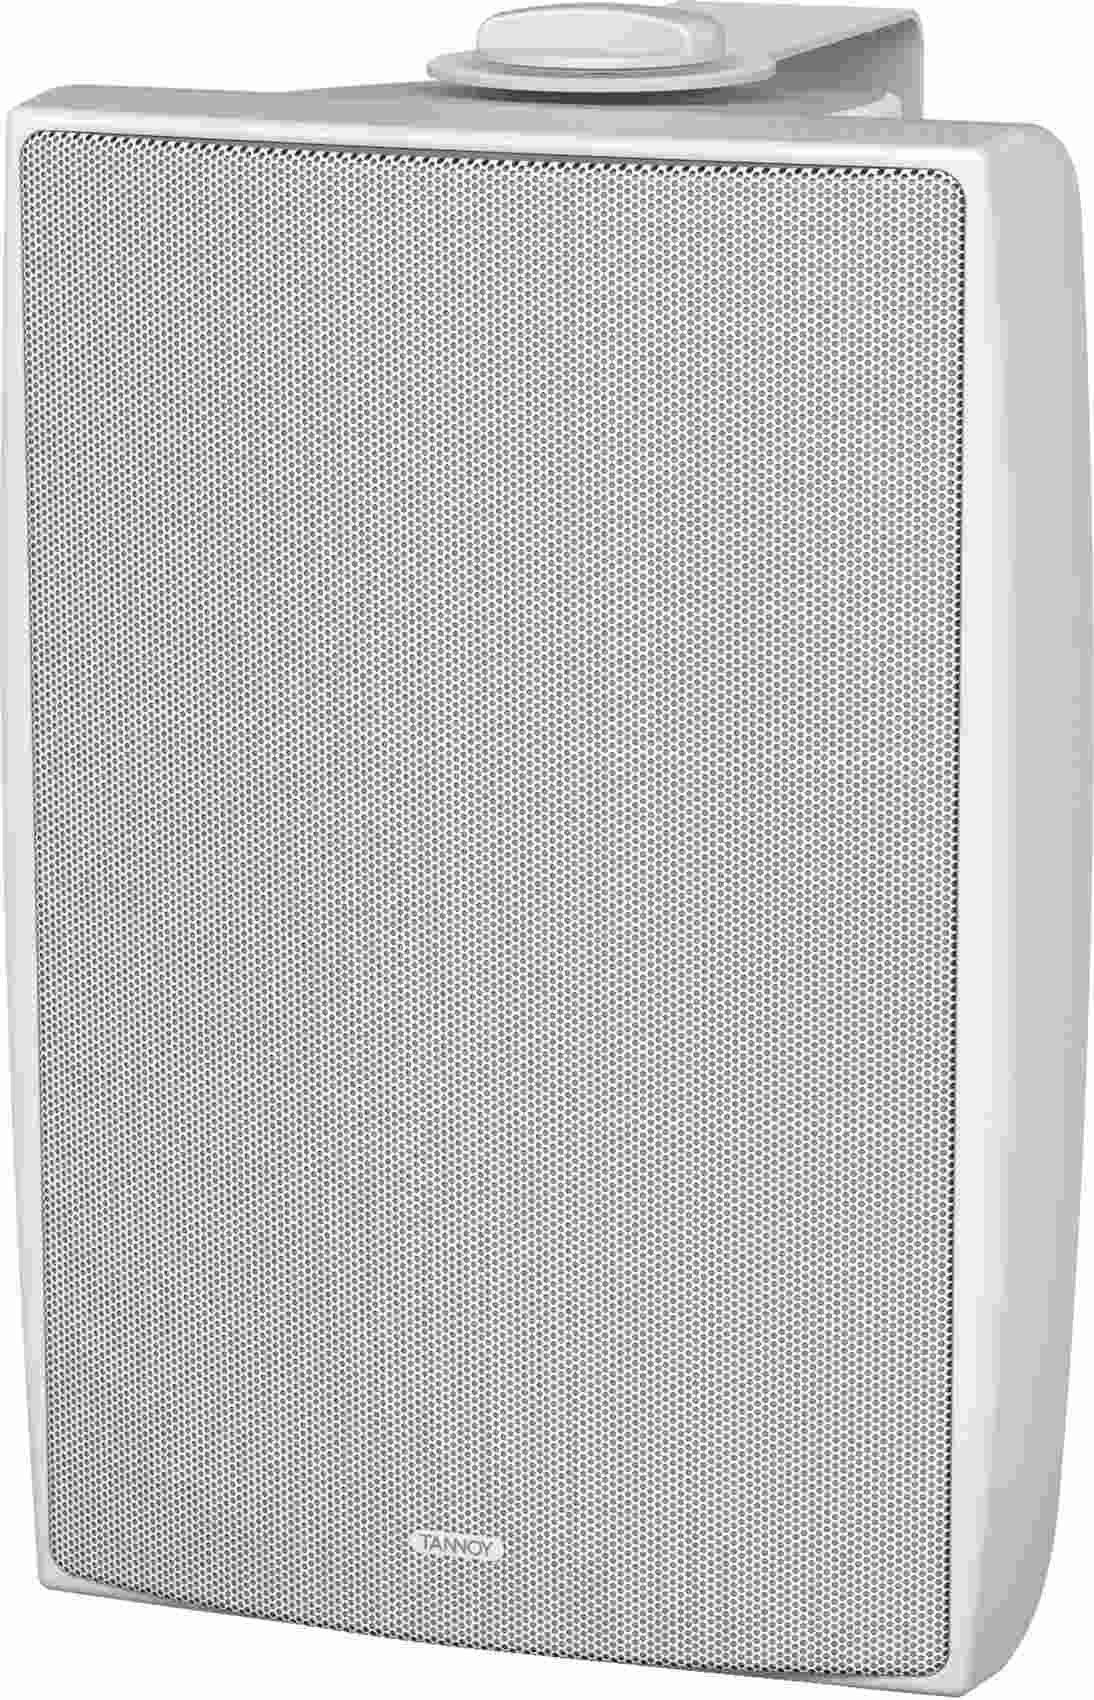 Tannoy DVS 6-WH - фото 5